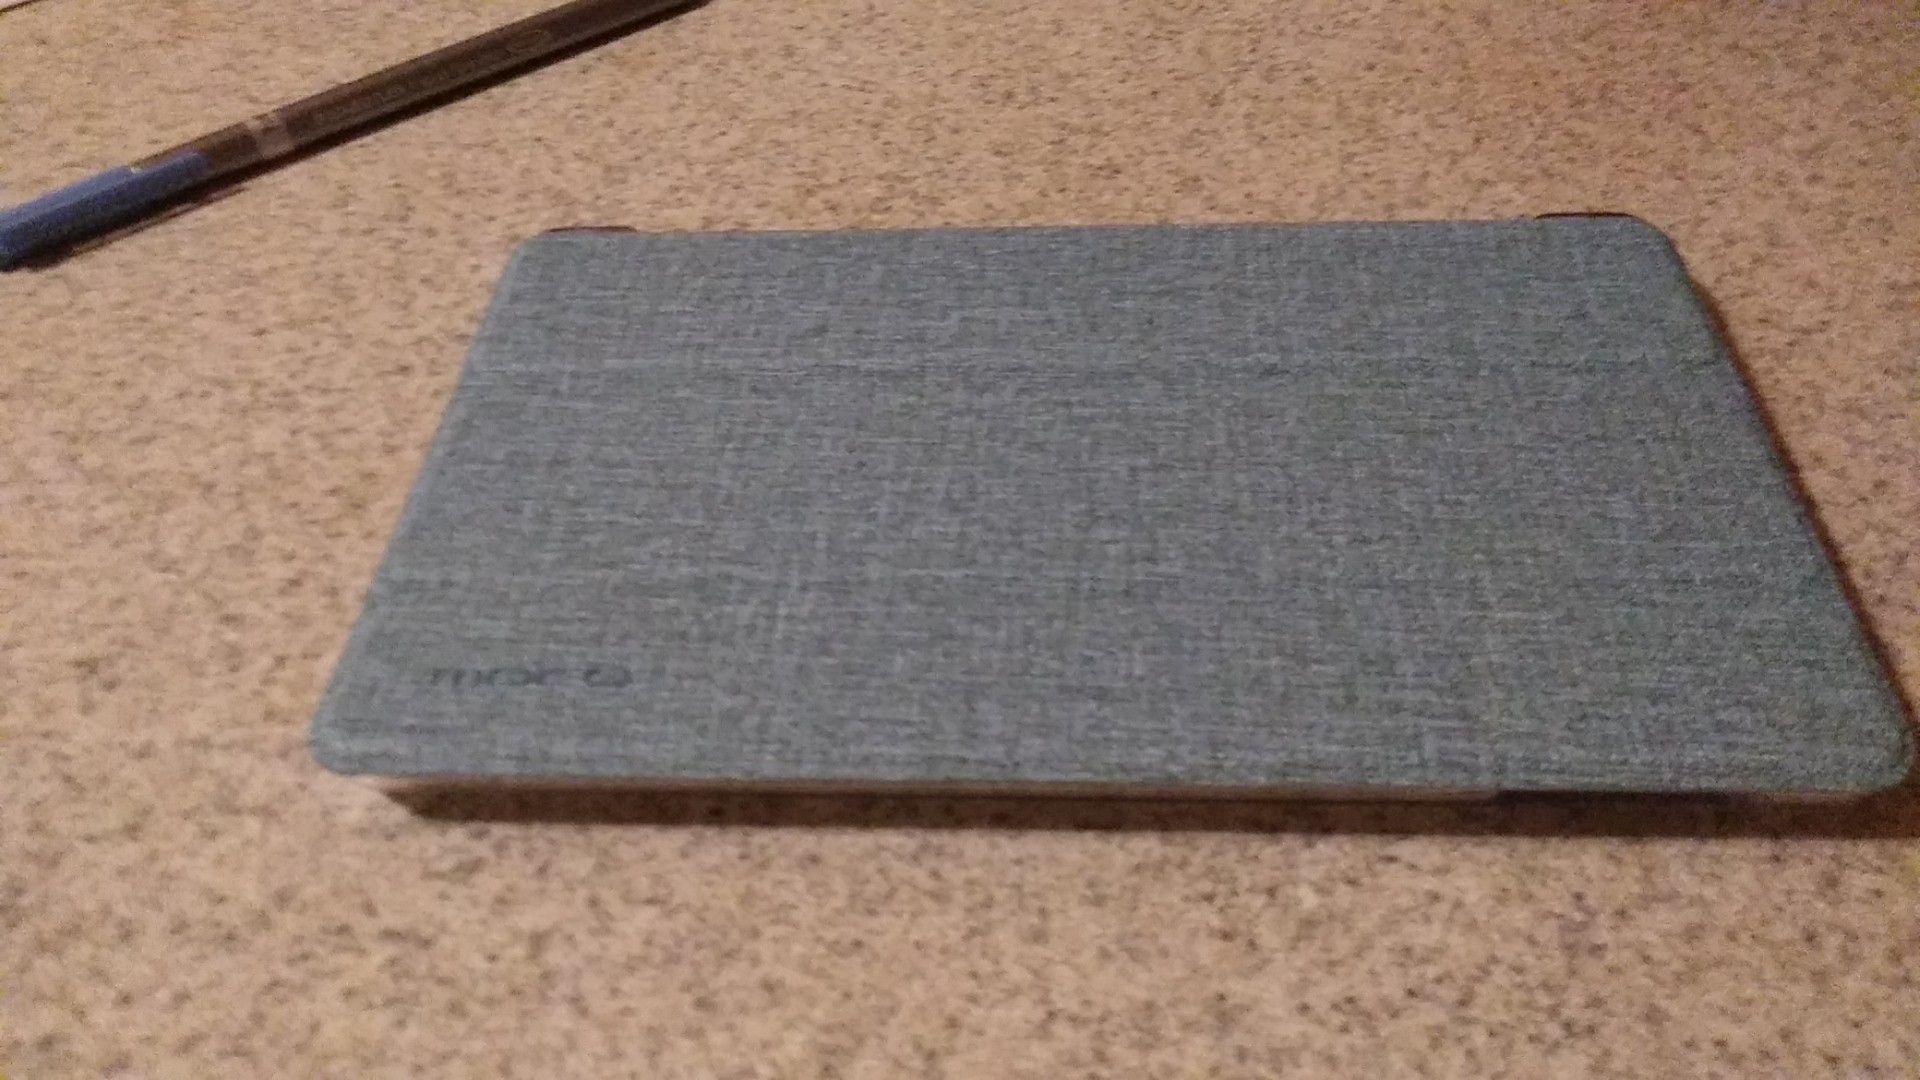 Amazon fire tablet cover